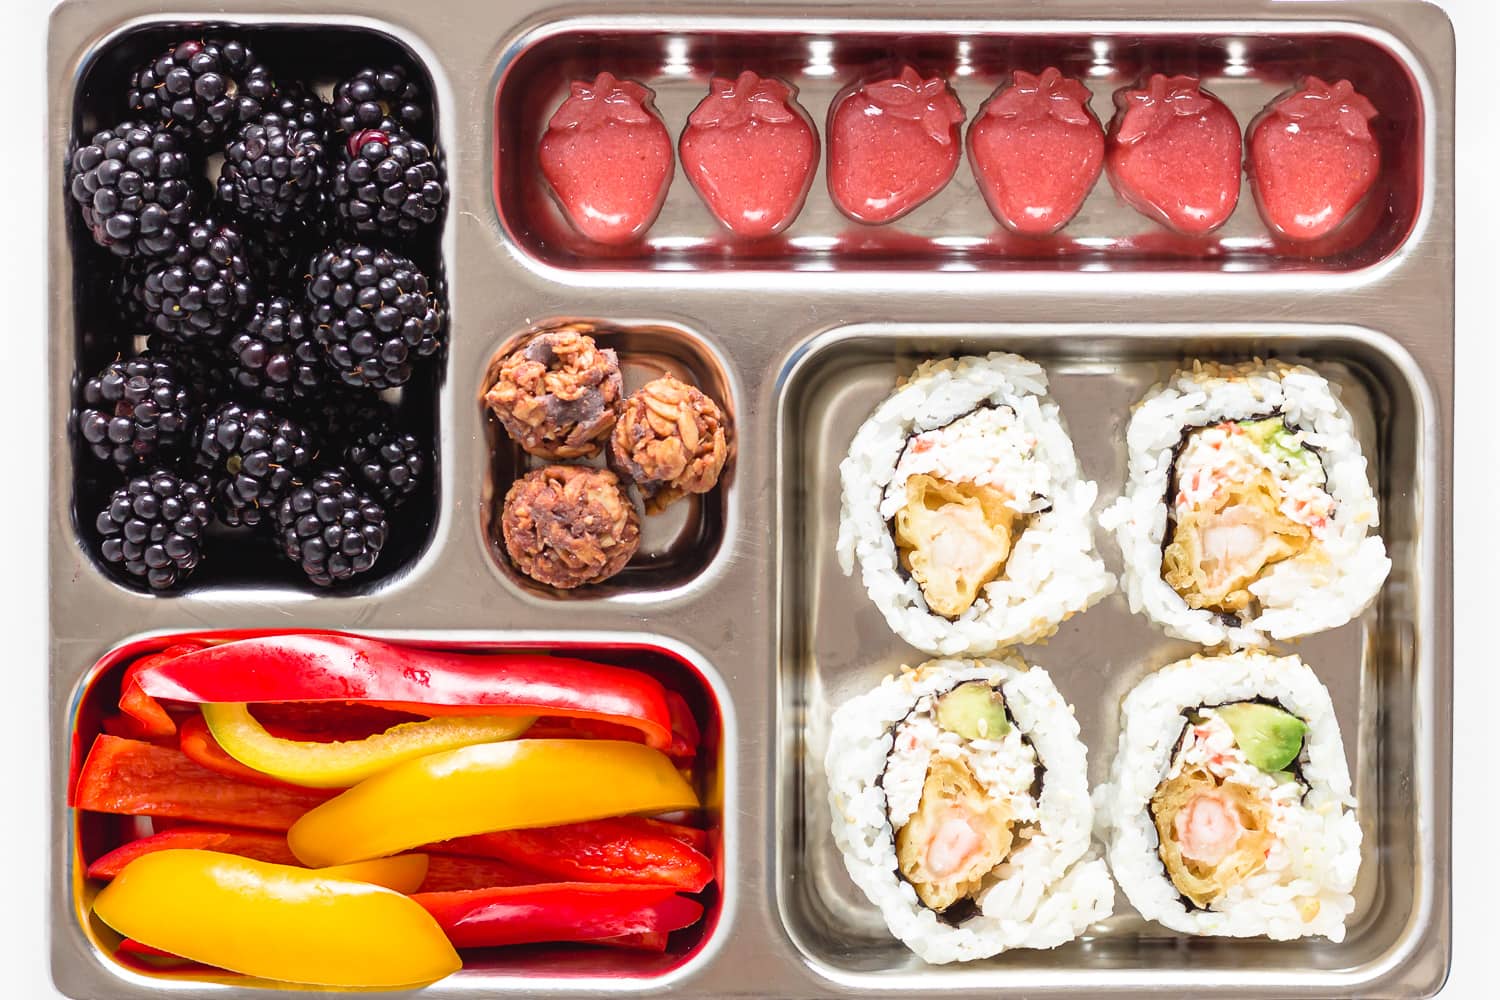 Bento lunch box filled with sushi rolls, bell pepper slices, blackberries, strawberry gummies and granola bites.